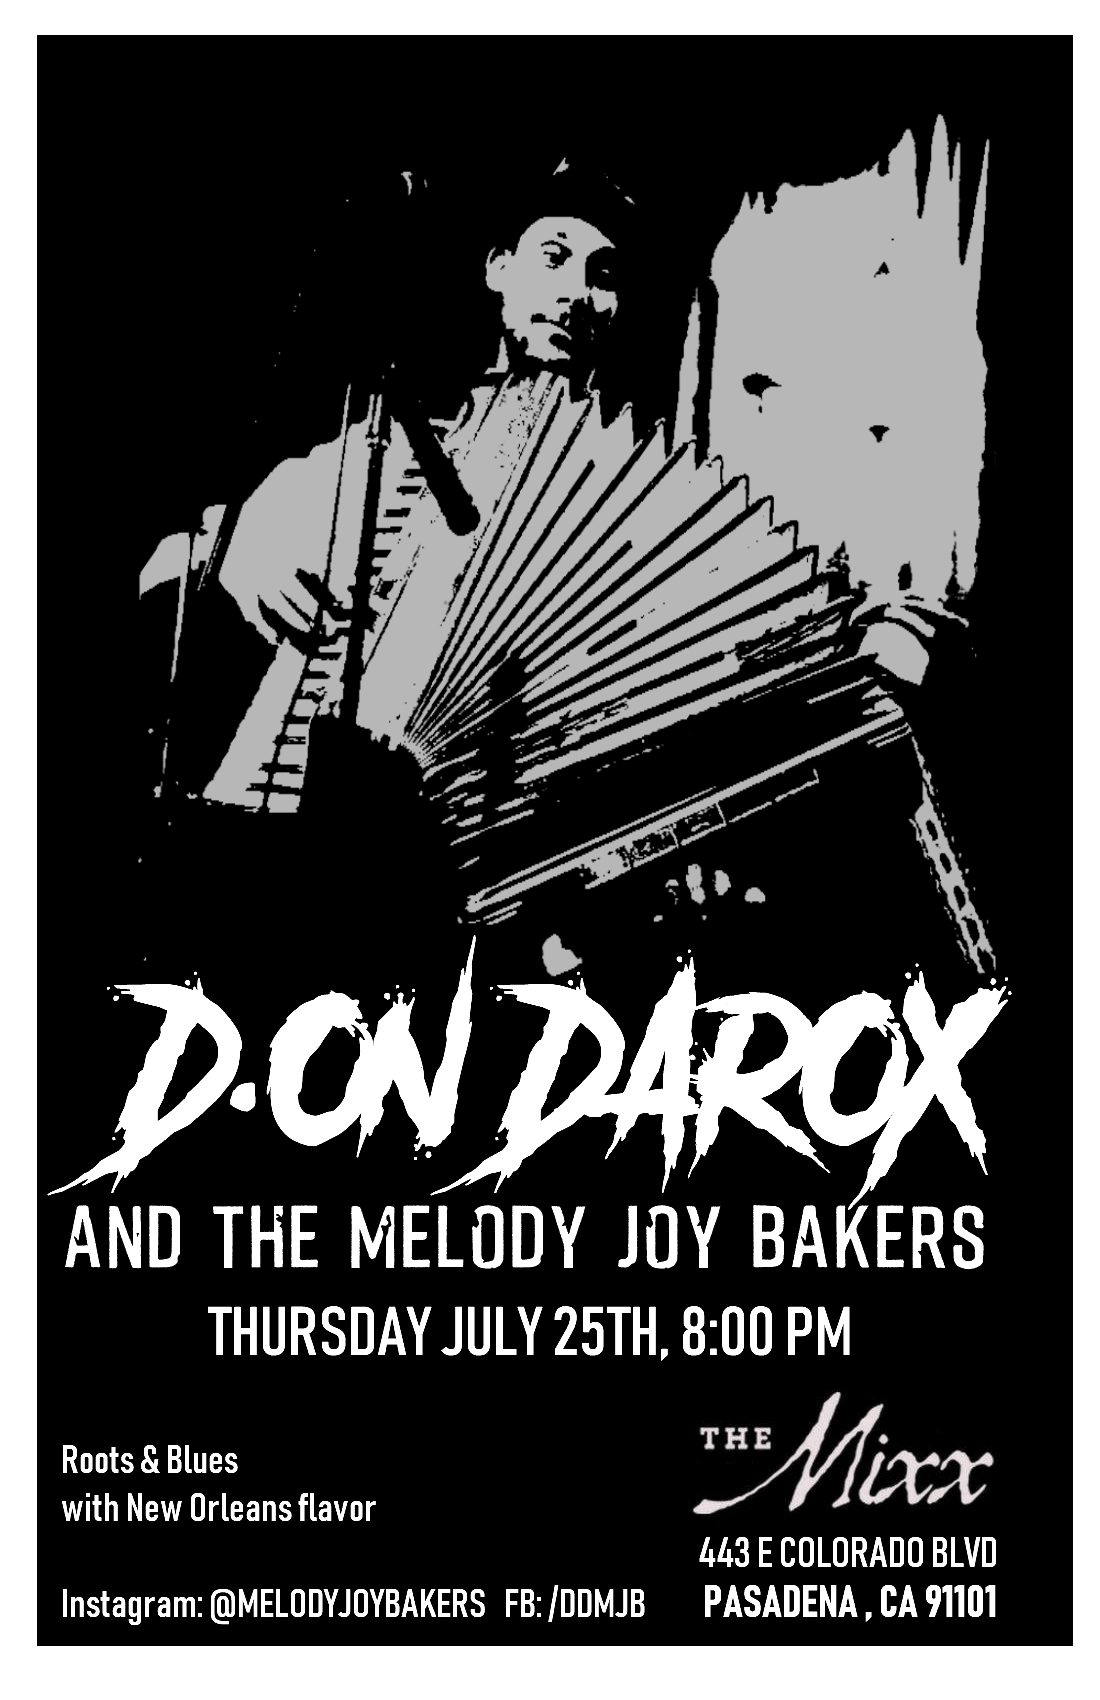 You are currently viewing D.on Darox & The Melody Joy Bakers